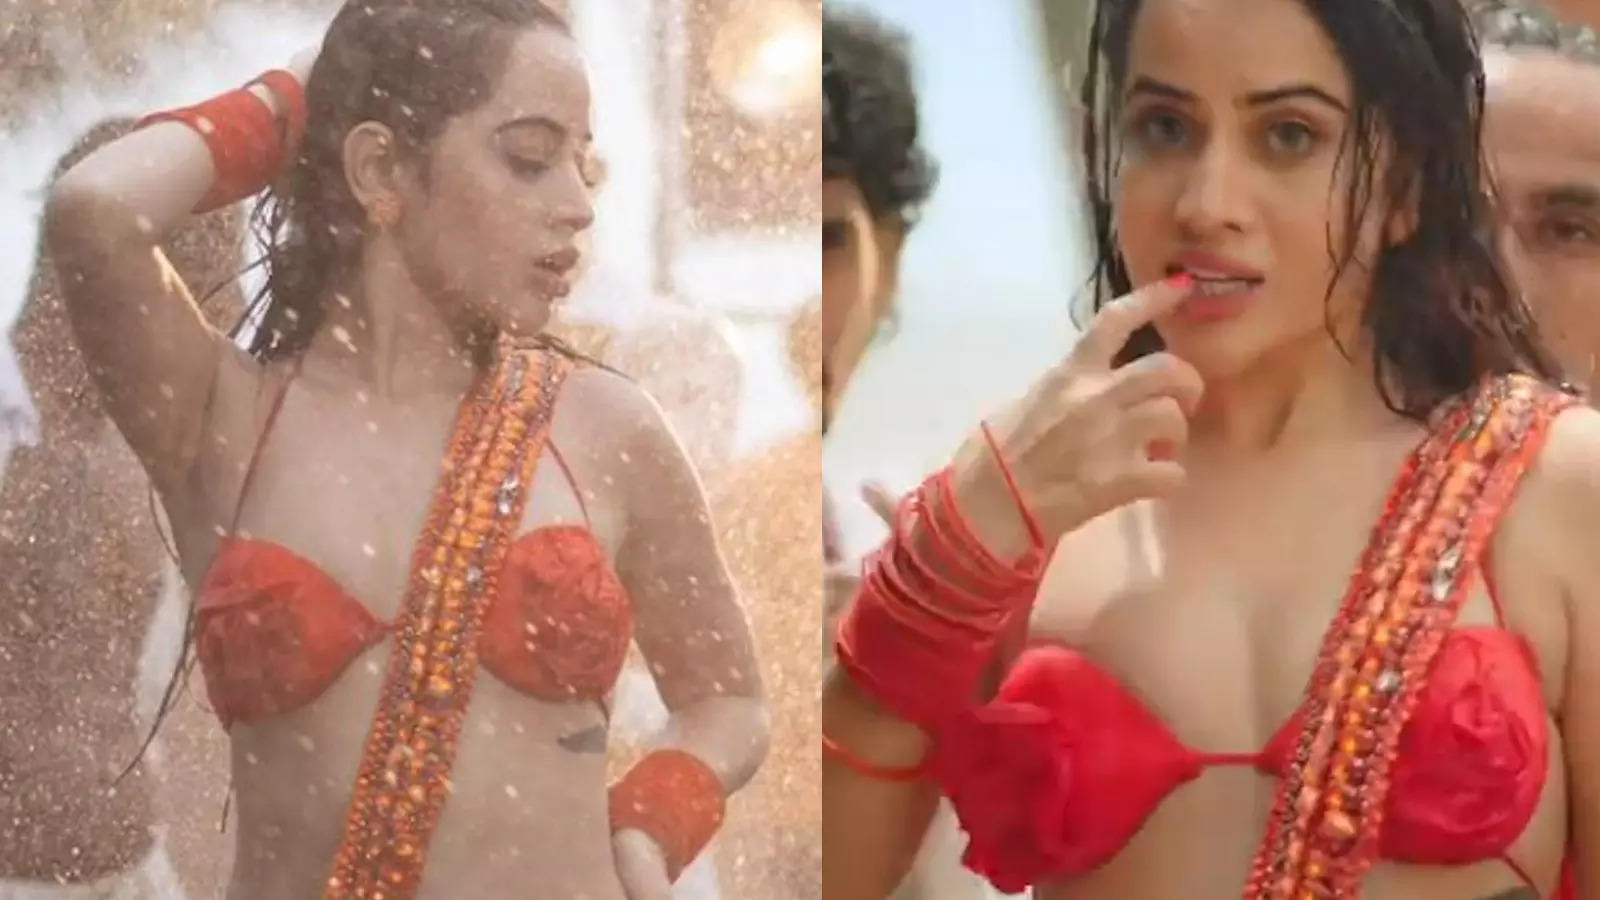 Hindi Nayika Ki Hindi Nayika Xx Video Com - Urfi Javed Latest Video: OMG! Urfi Javed's revealing outfit in music video  'Haye Haye Yeh Majboori' lands her in legal trouble, complaint filed for  'sexually explicit' content